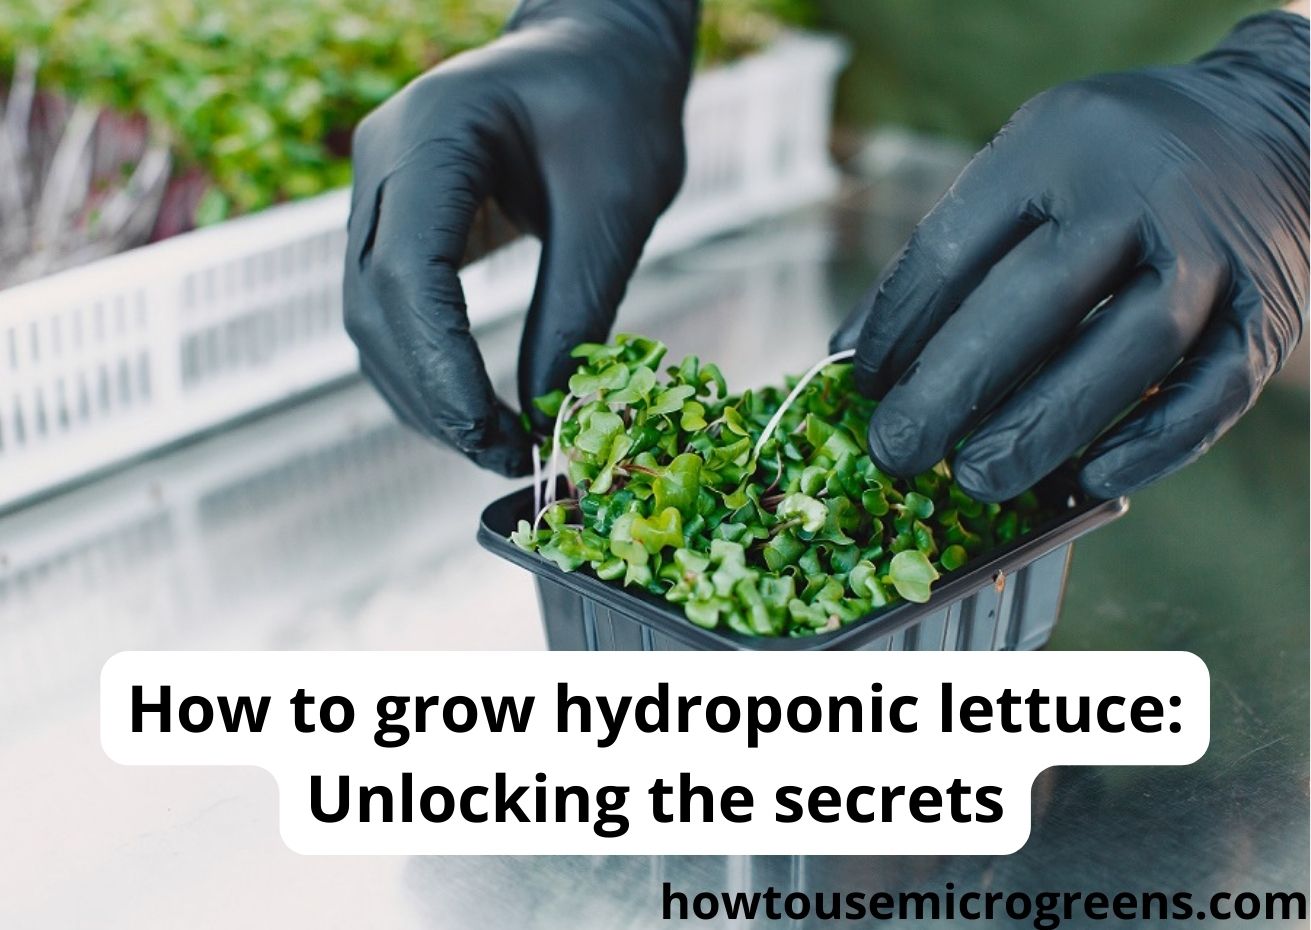 How to grow hydroponic lettuce? The best guide (20+ tips)